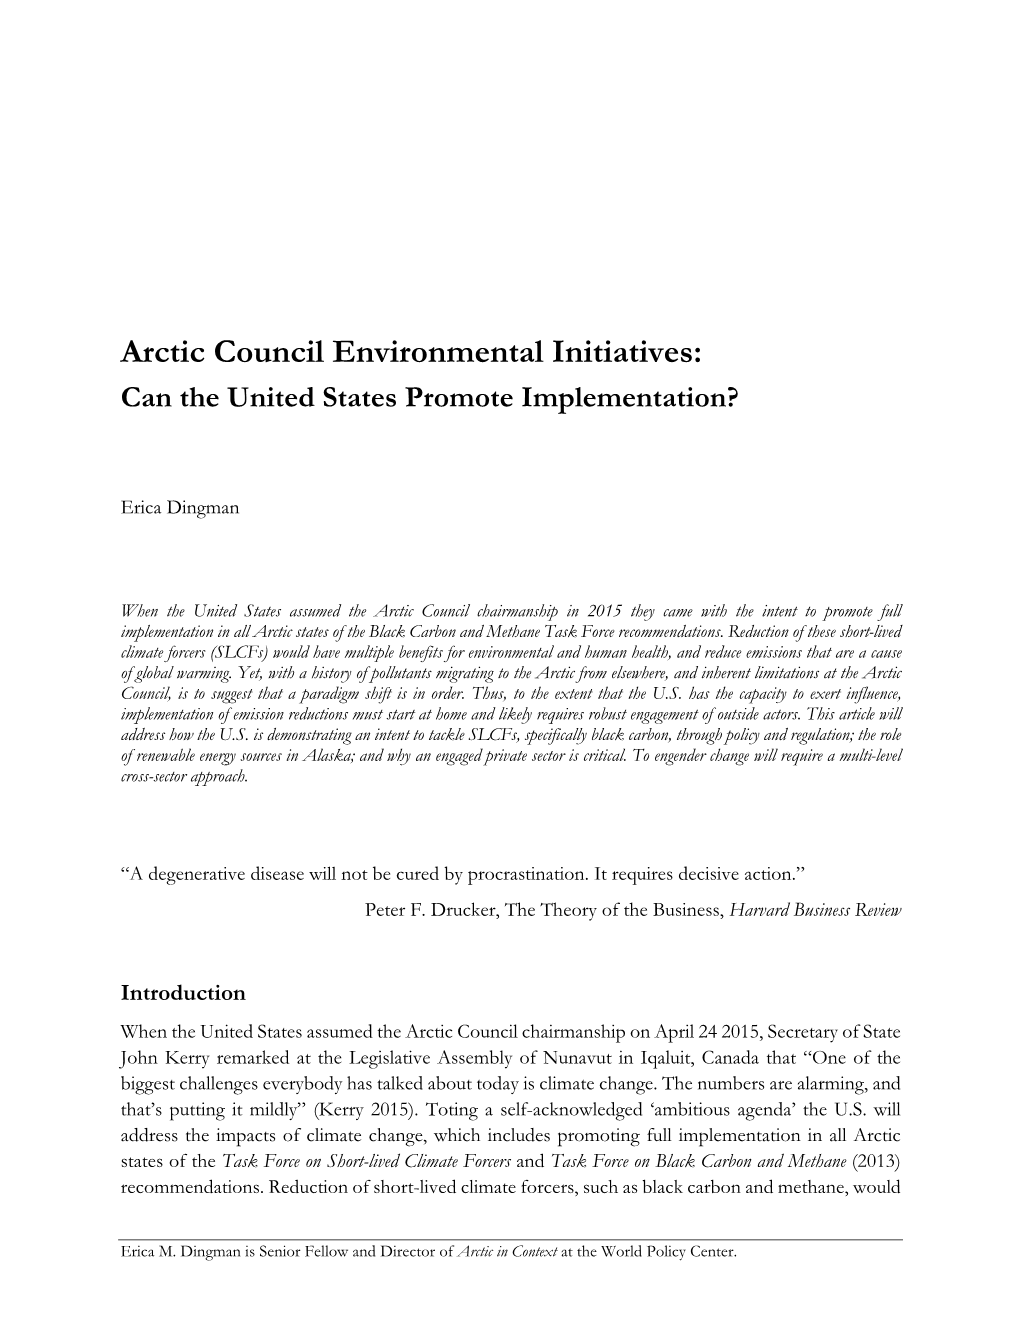 Arctic Council Environmental Initiatives: Can the United States Promote Implementation?